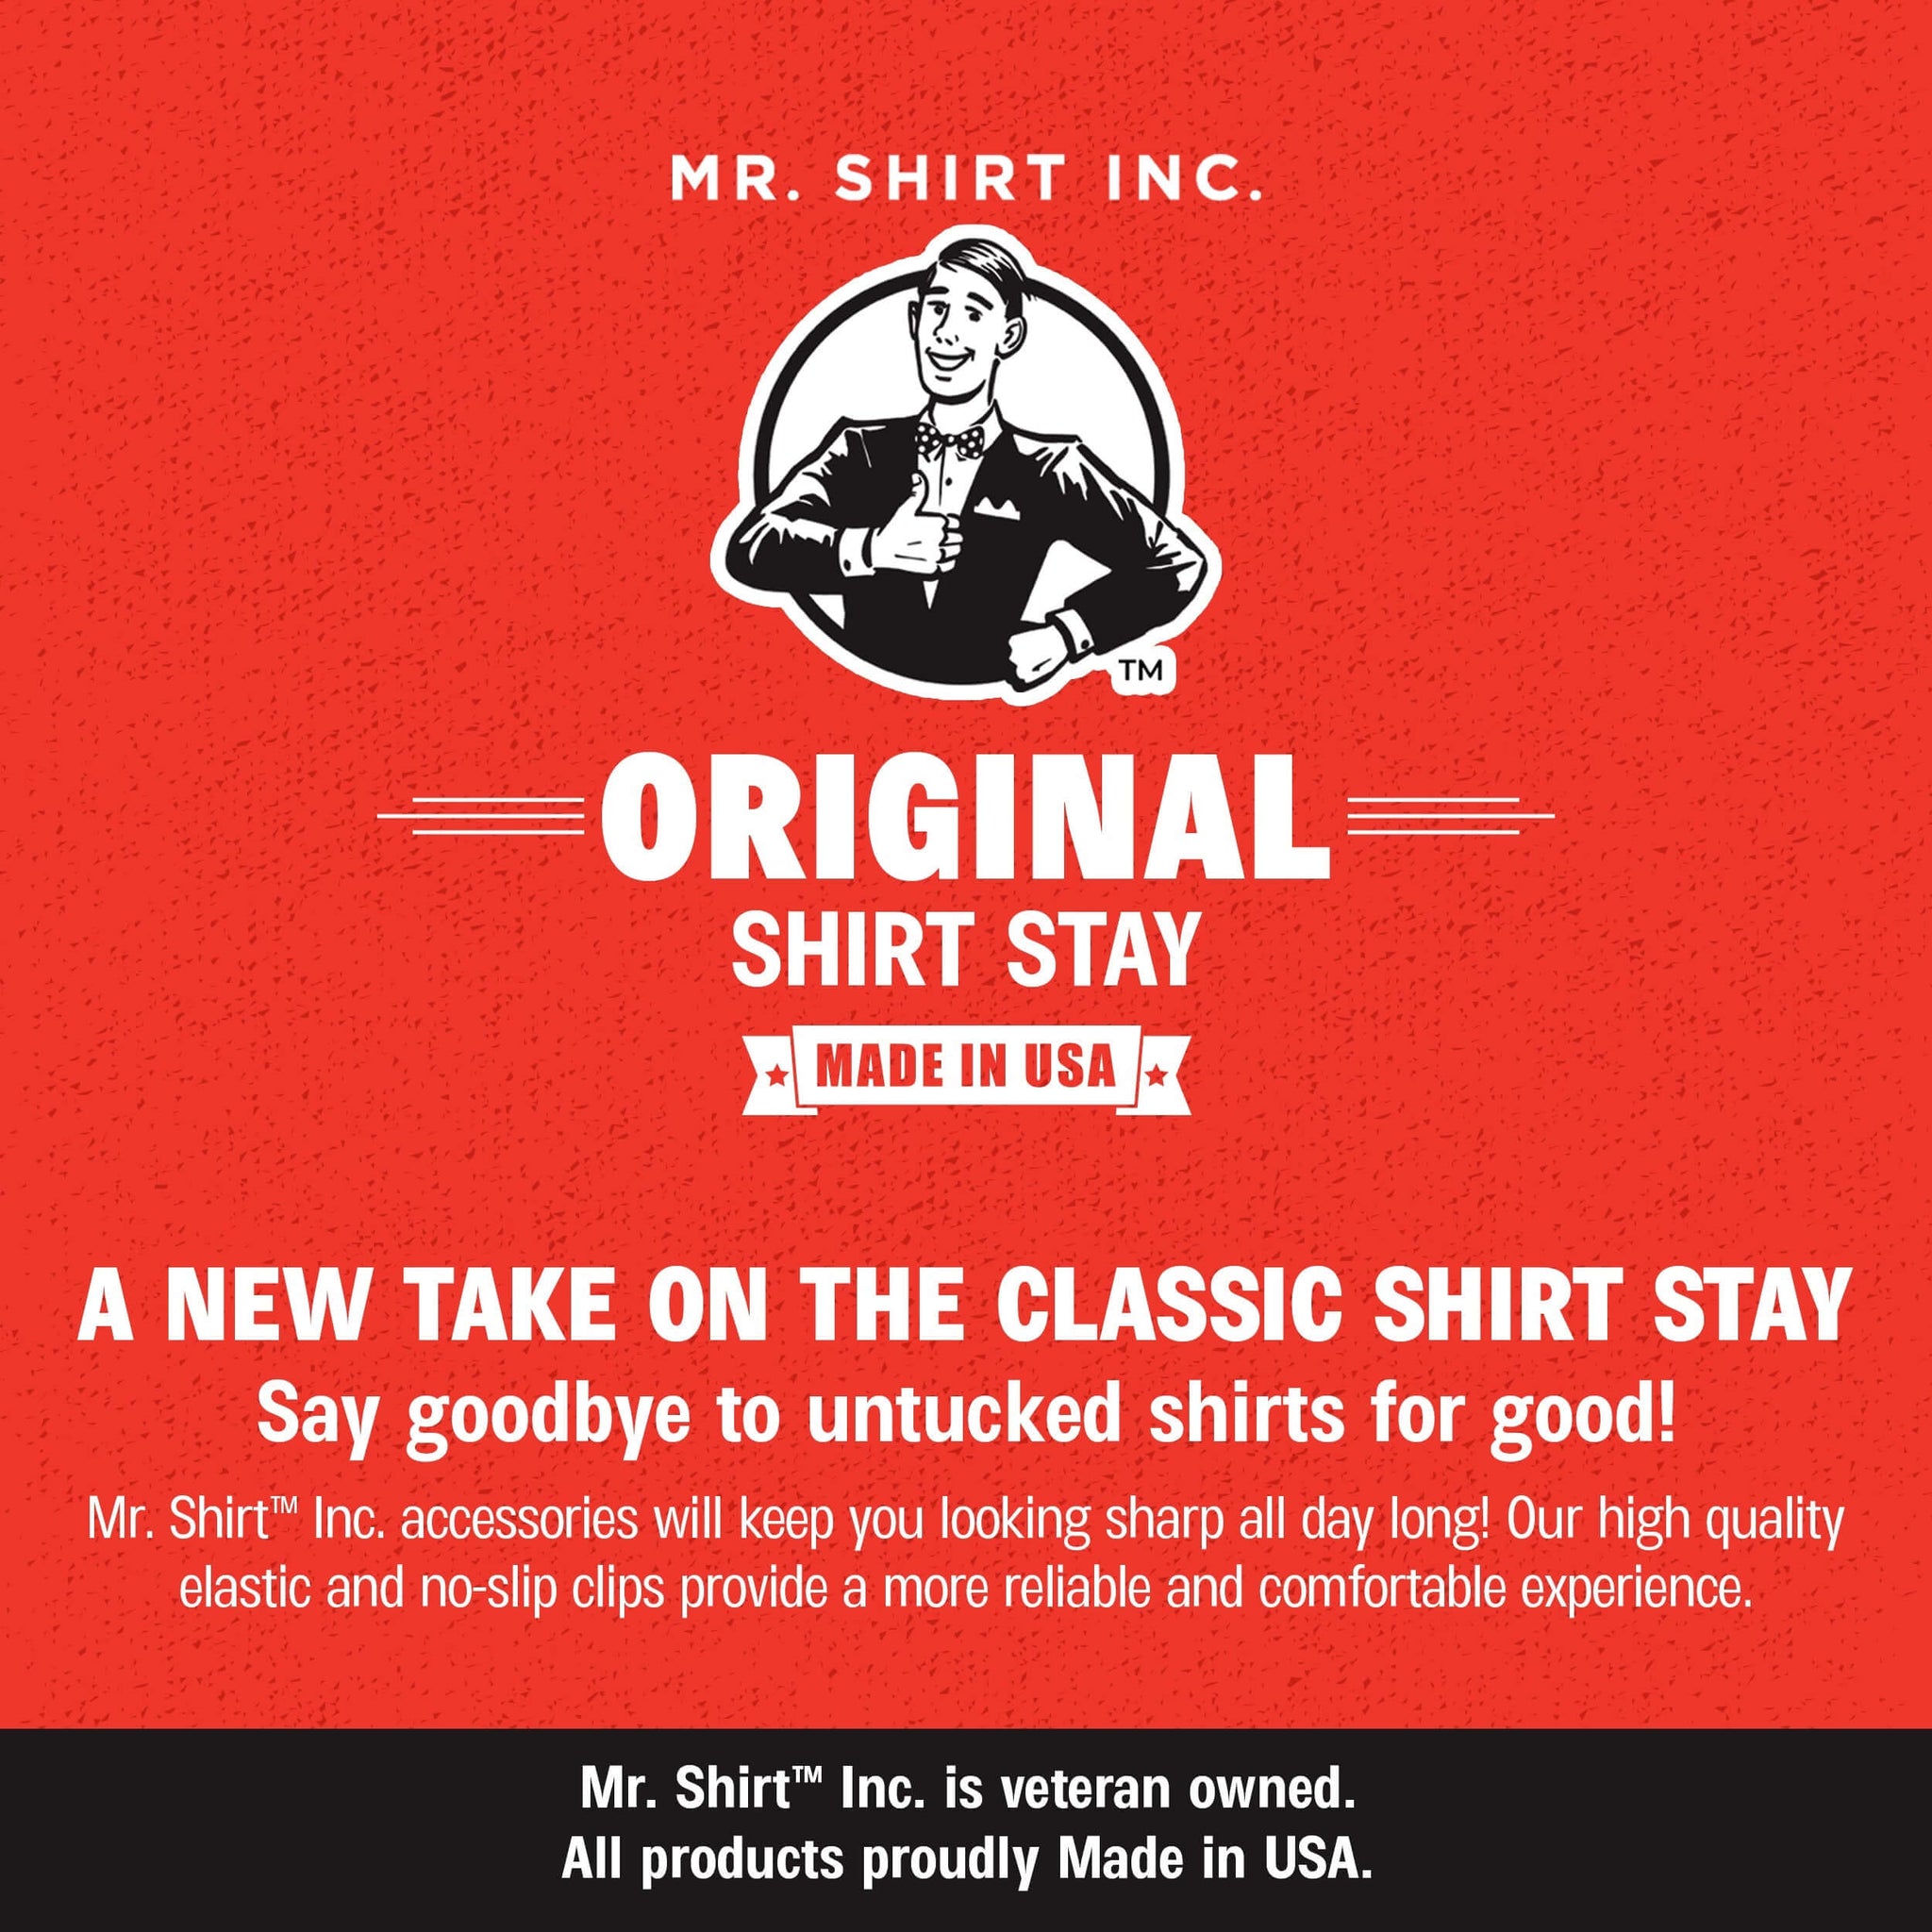 How can I stay updated on new arrivals of shirts made in the USA?